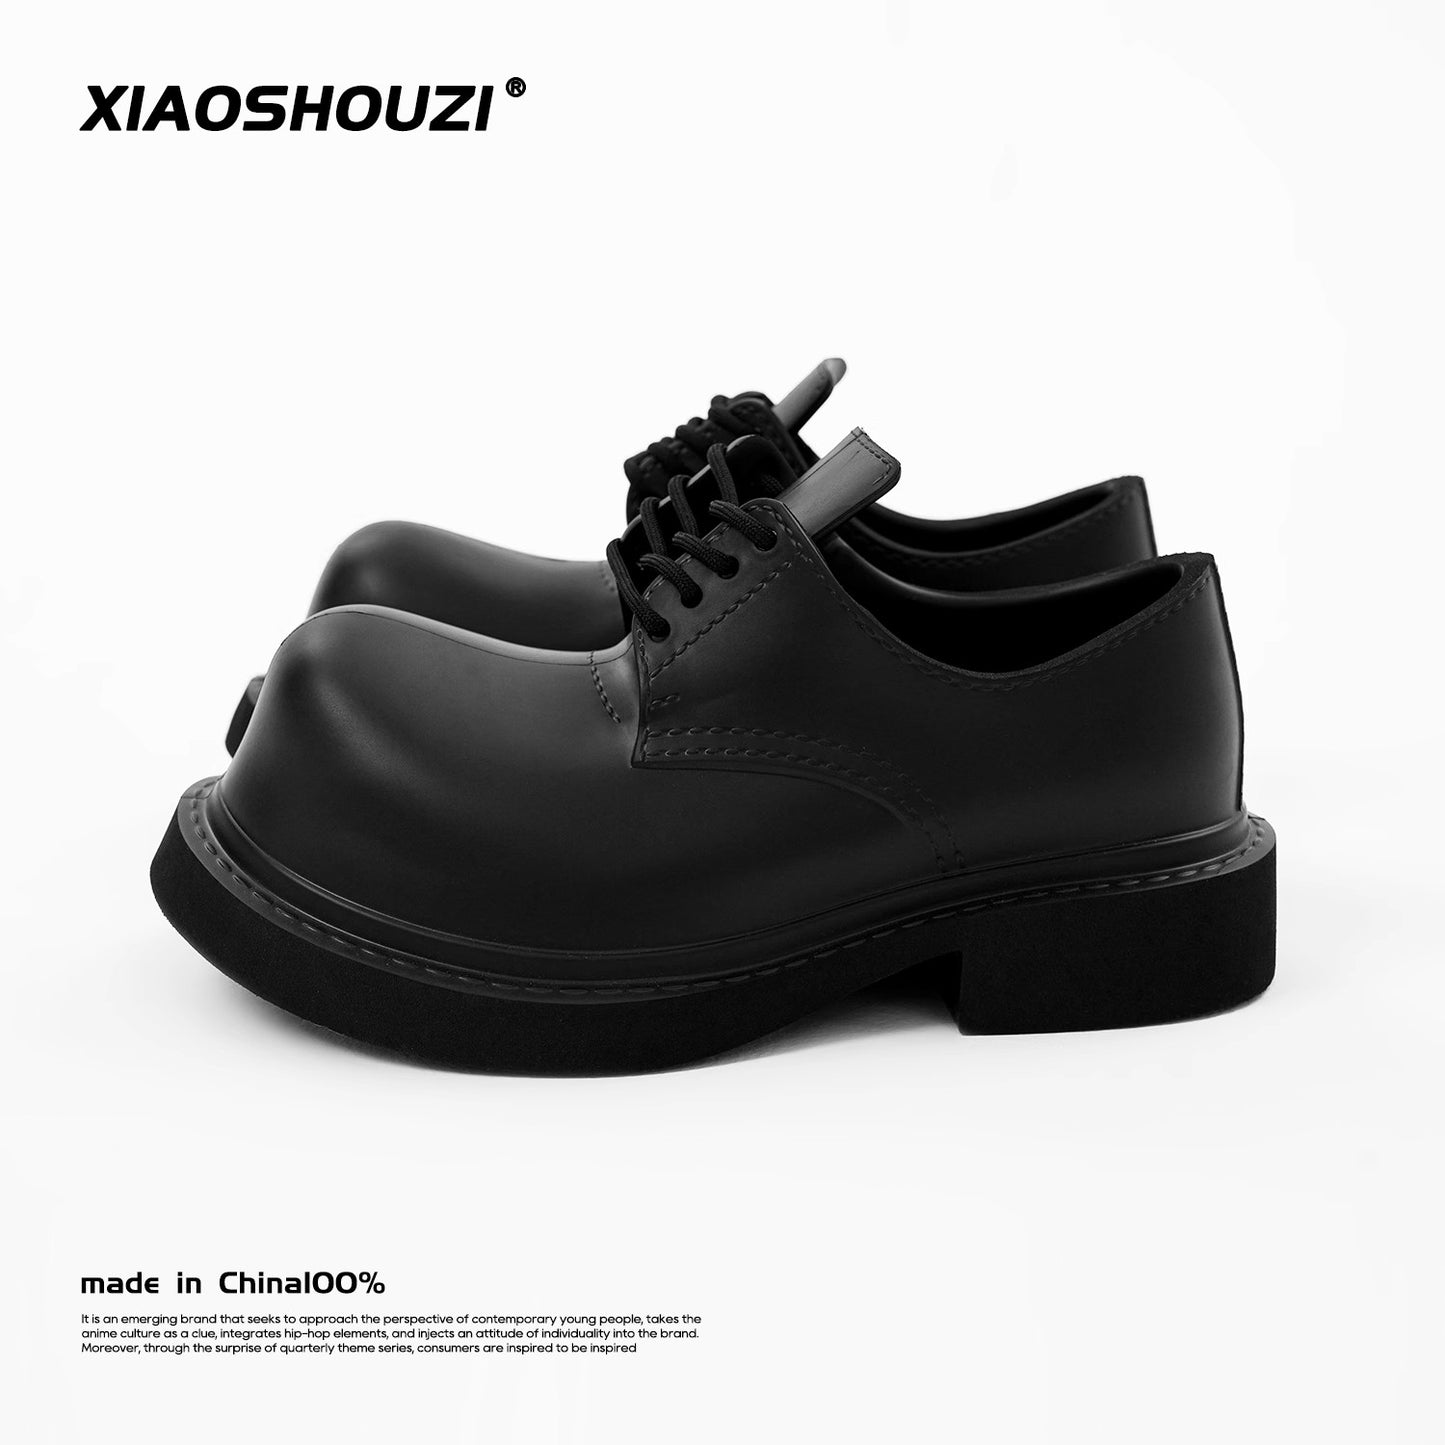 Round Toe Thick Soled Leather Shoes WN6909